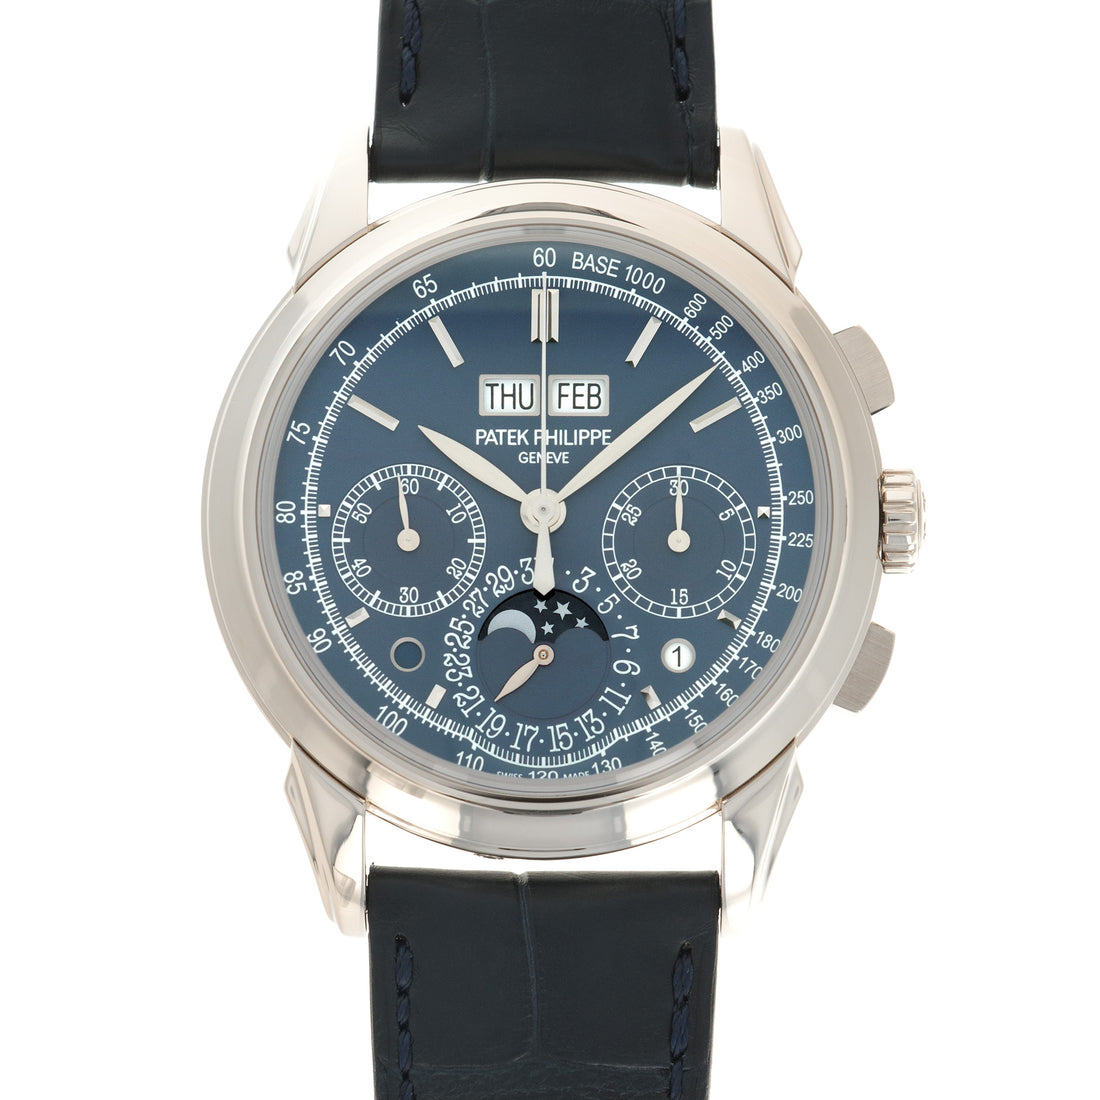 Patek Philippe White Gold Perpetual Chronograph Watch Ref. 5270